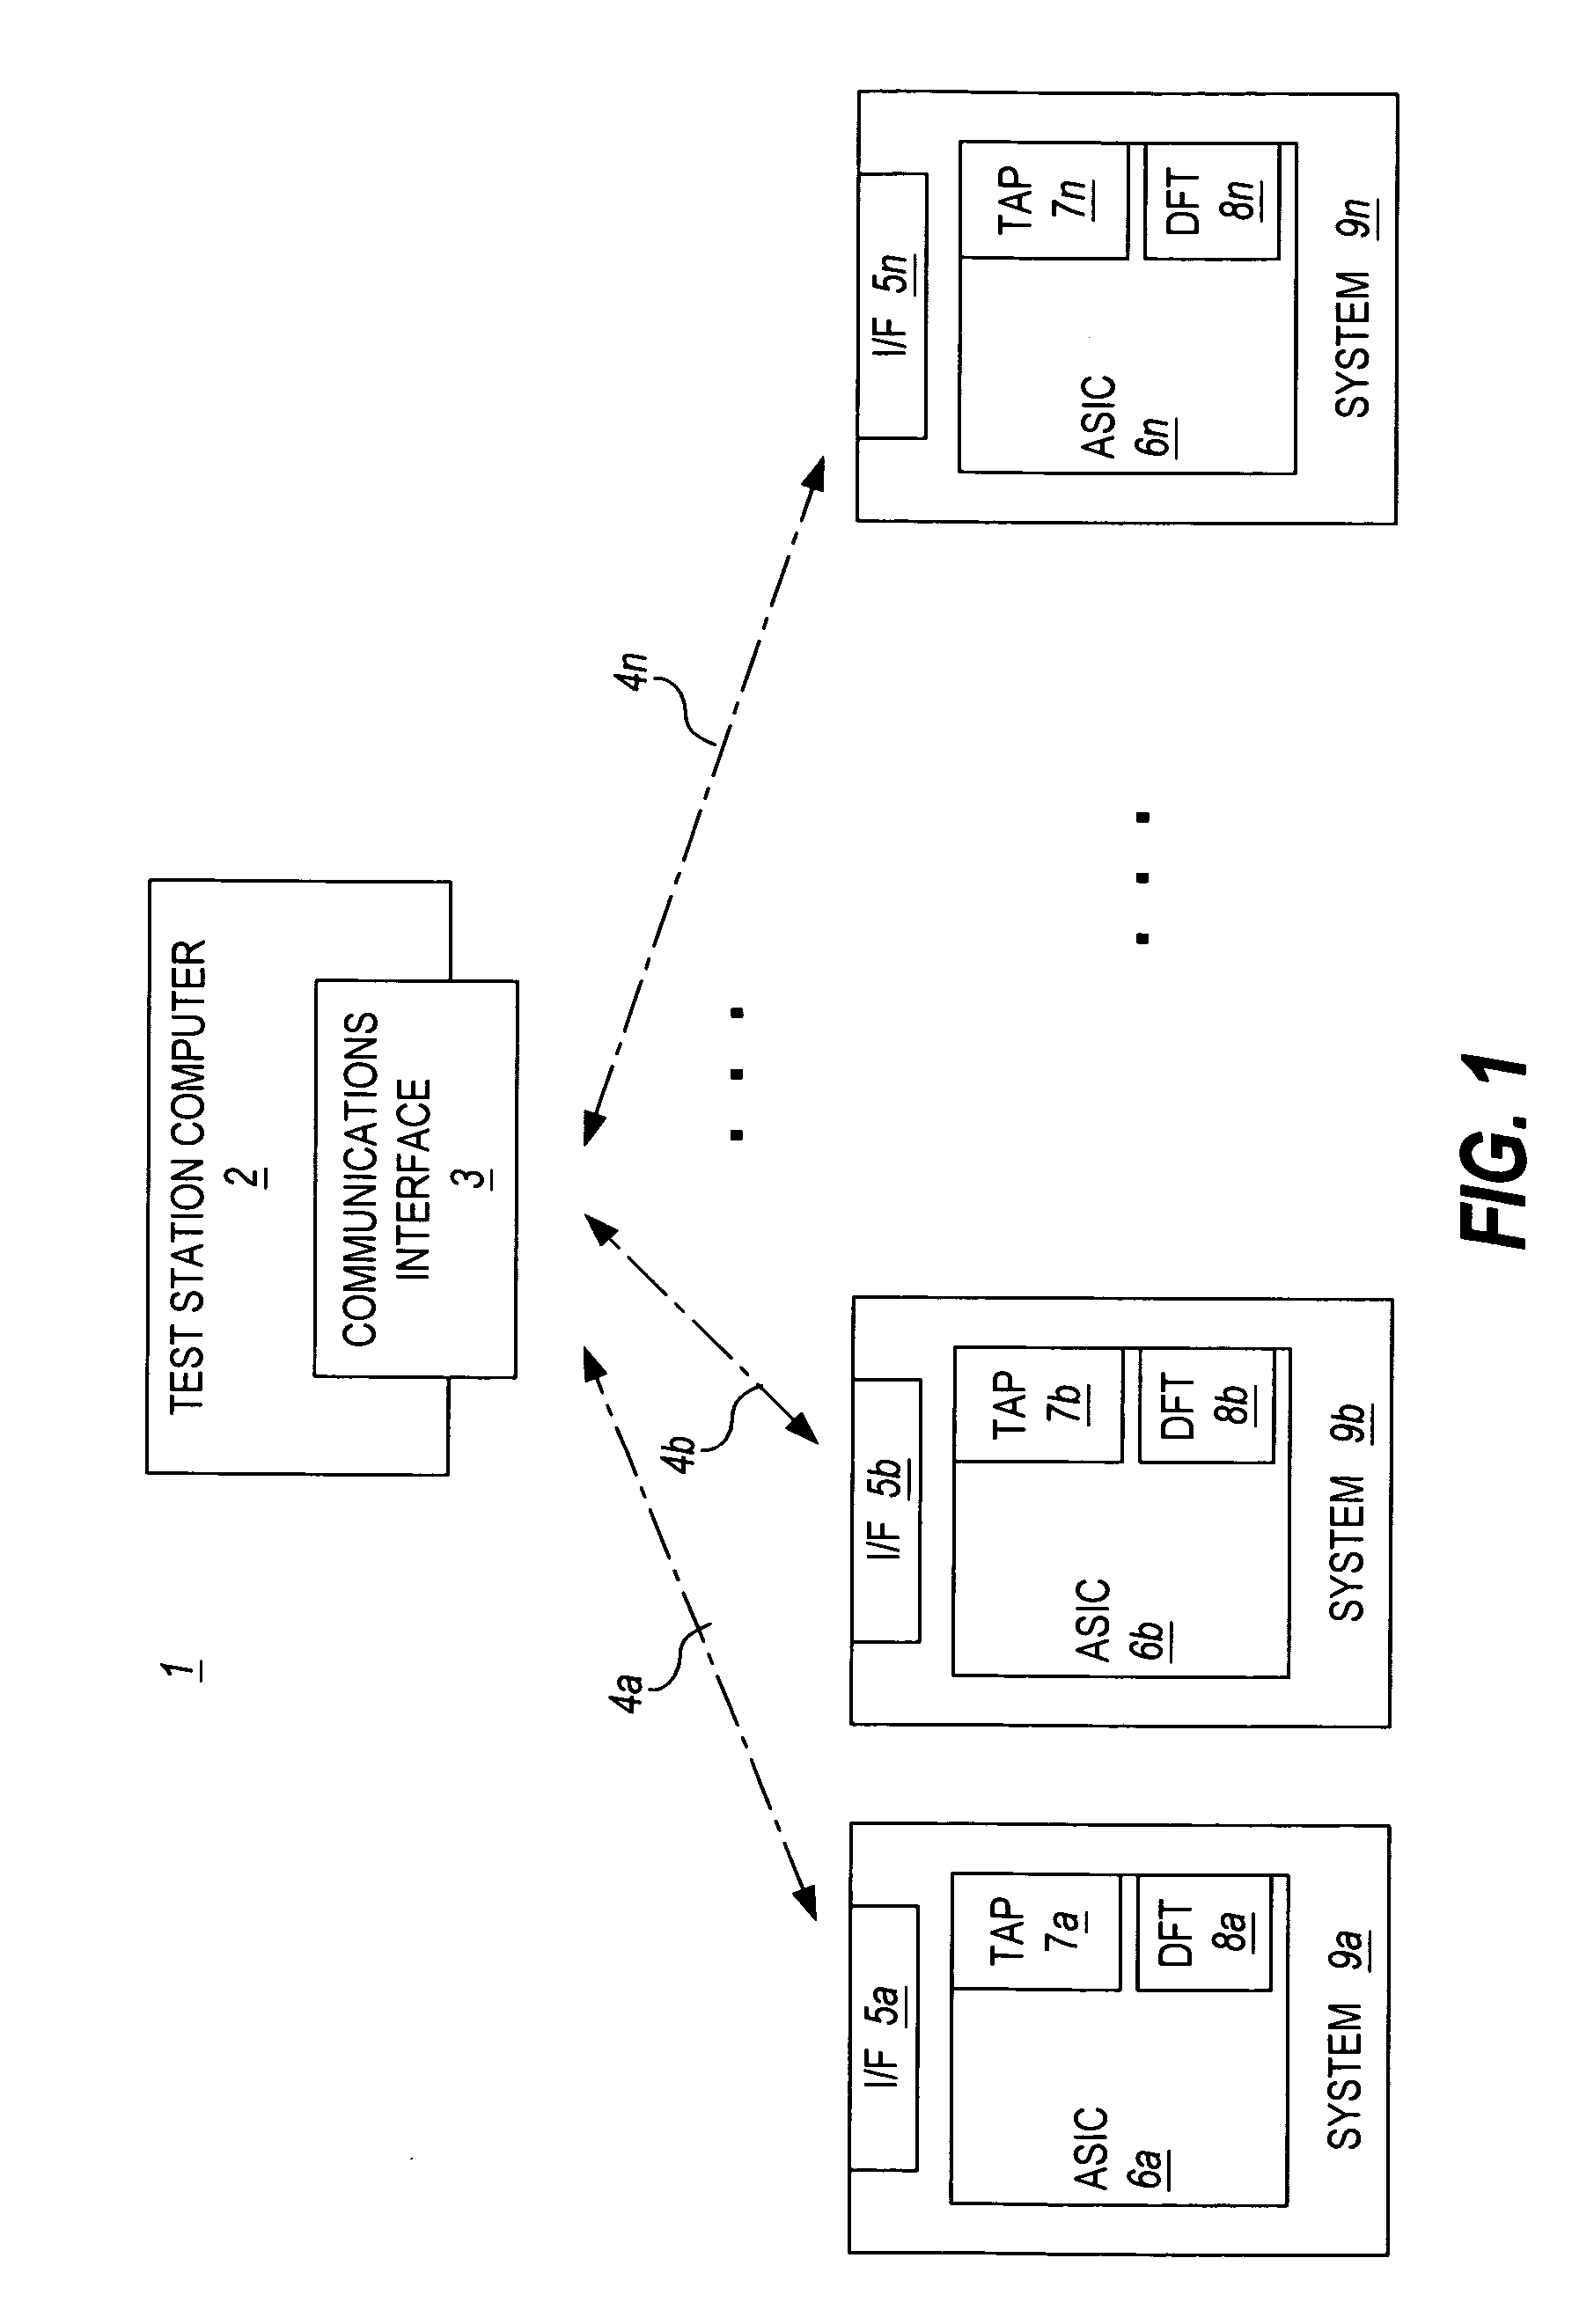 Remote integrated circuit testing method and apparatus